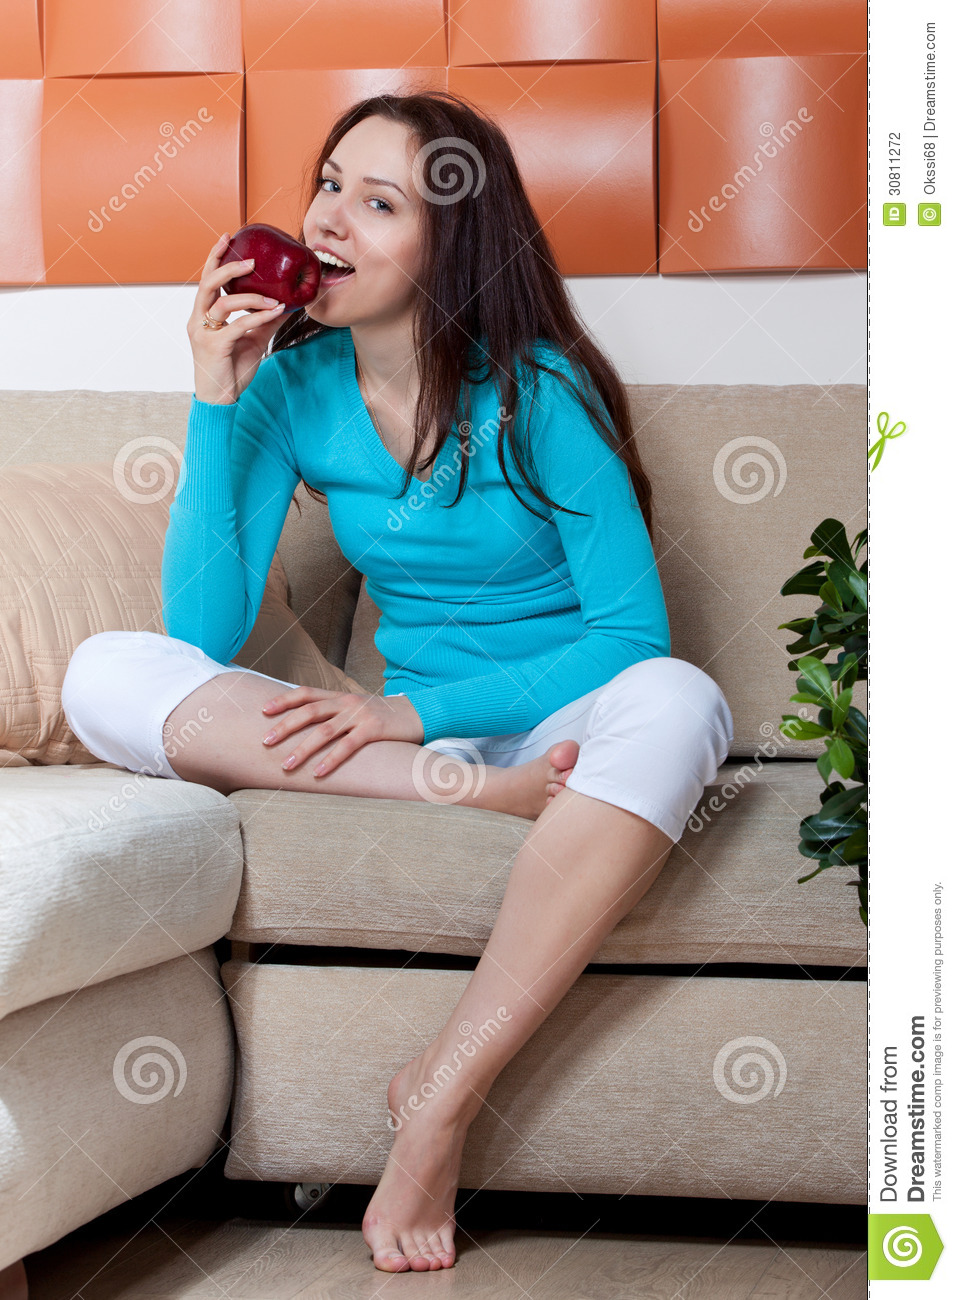 Woman Sitting On The Couch And Eat An Apple Stock Photography   Image    